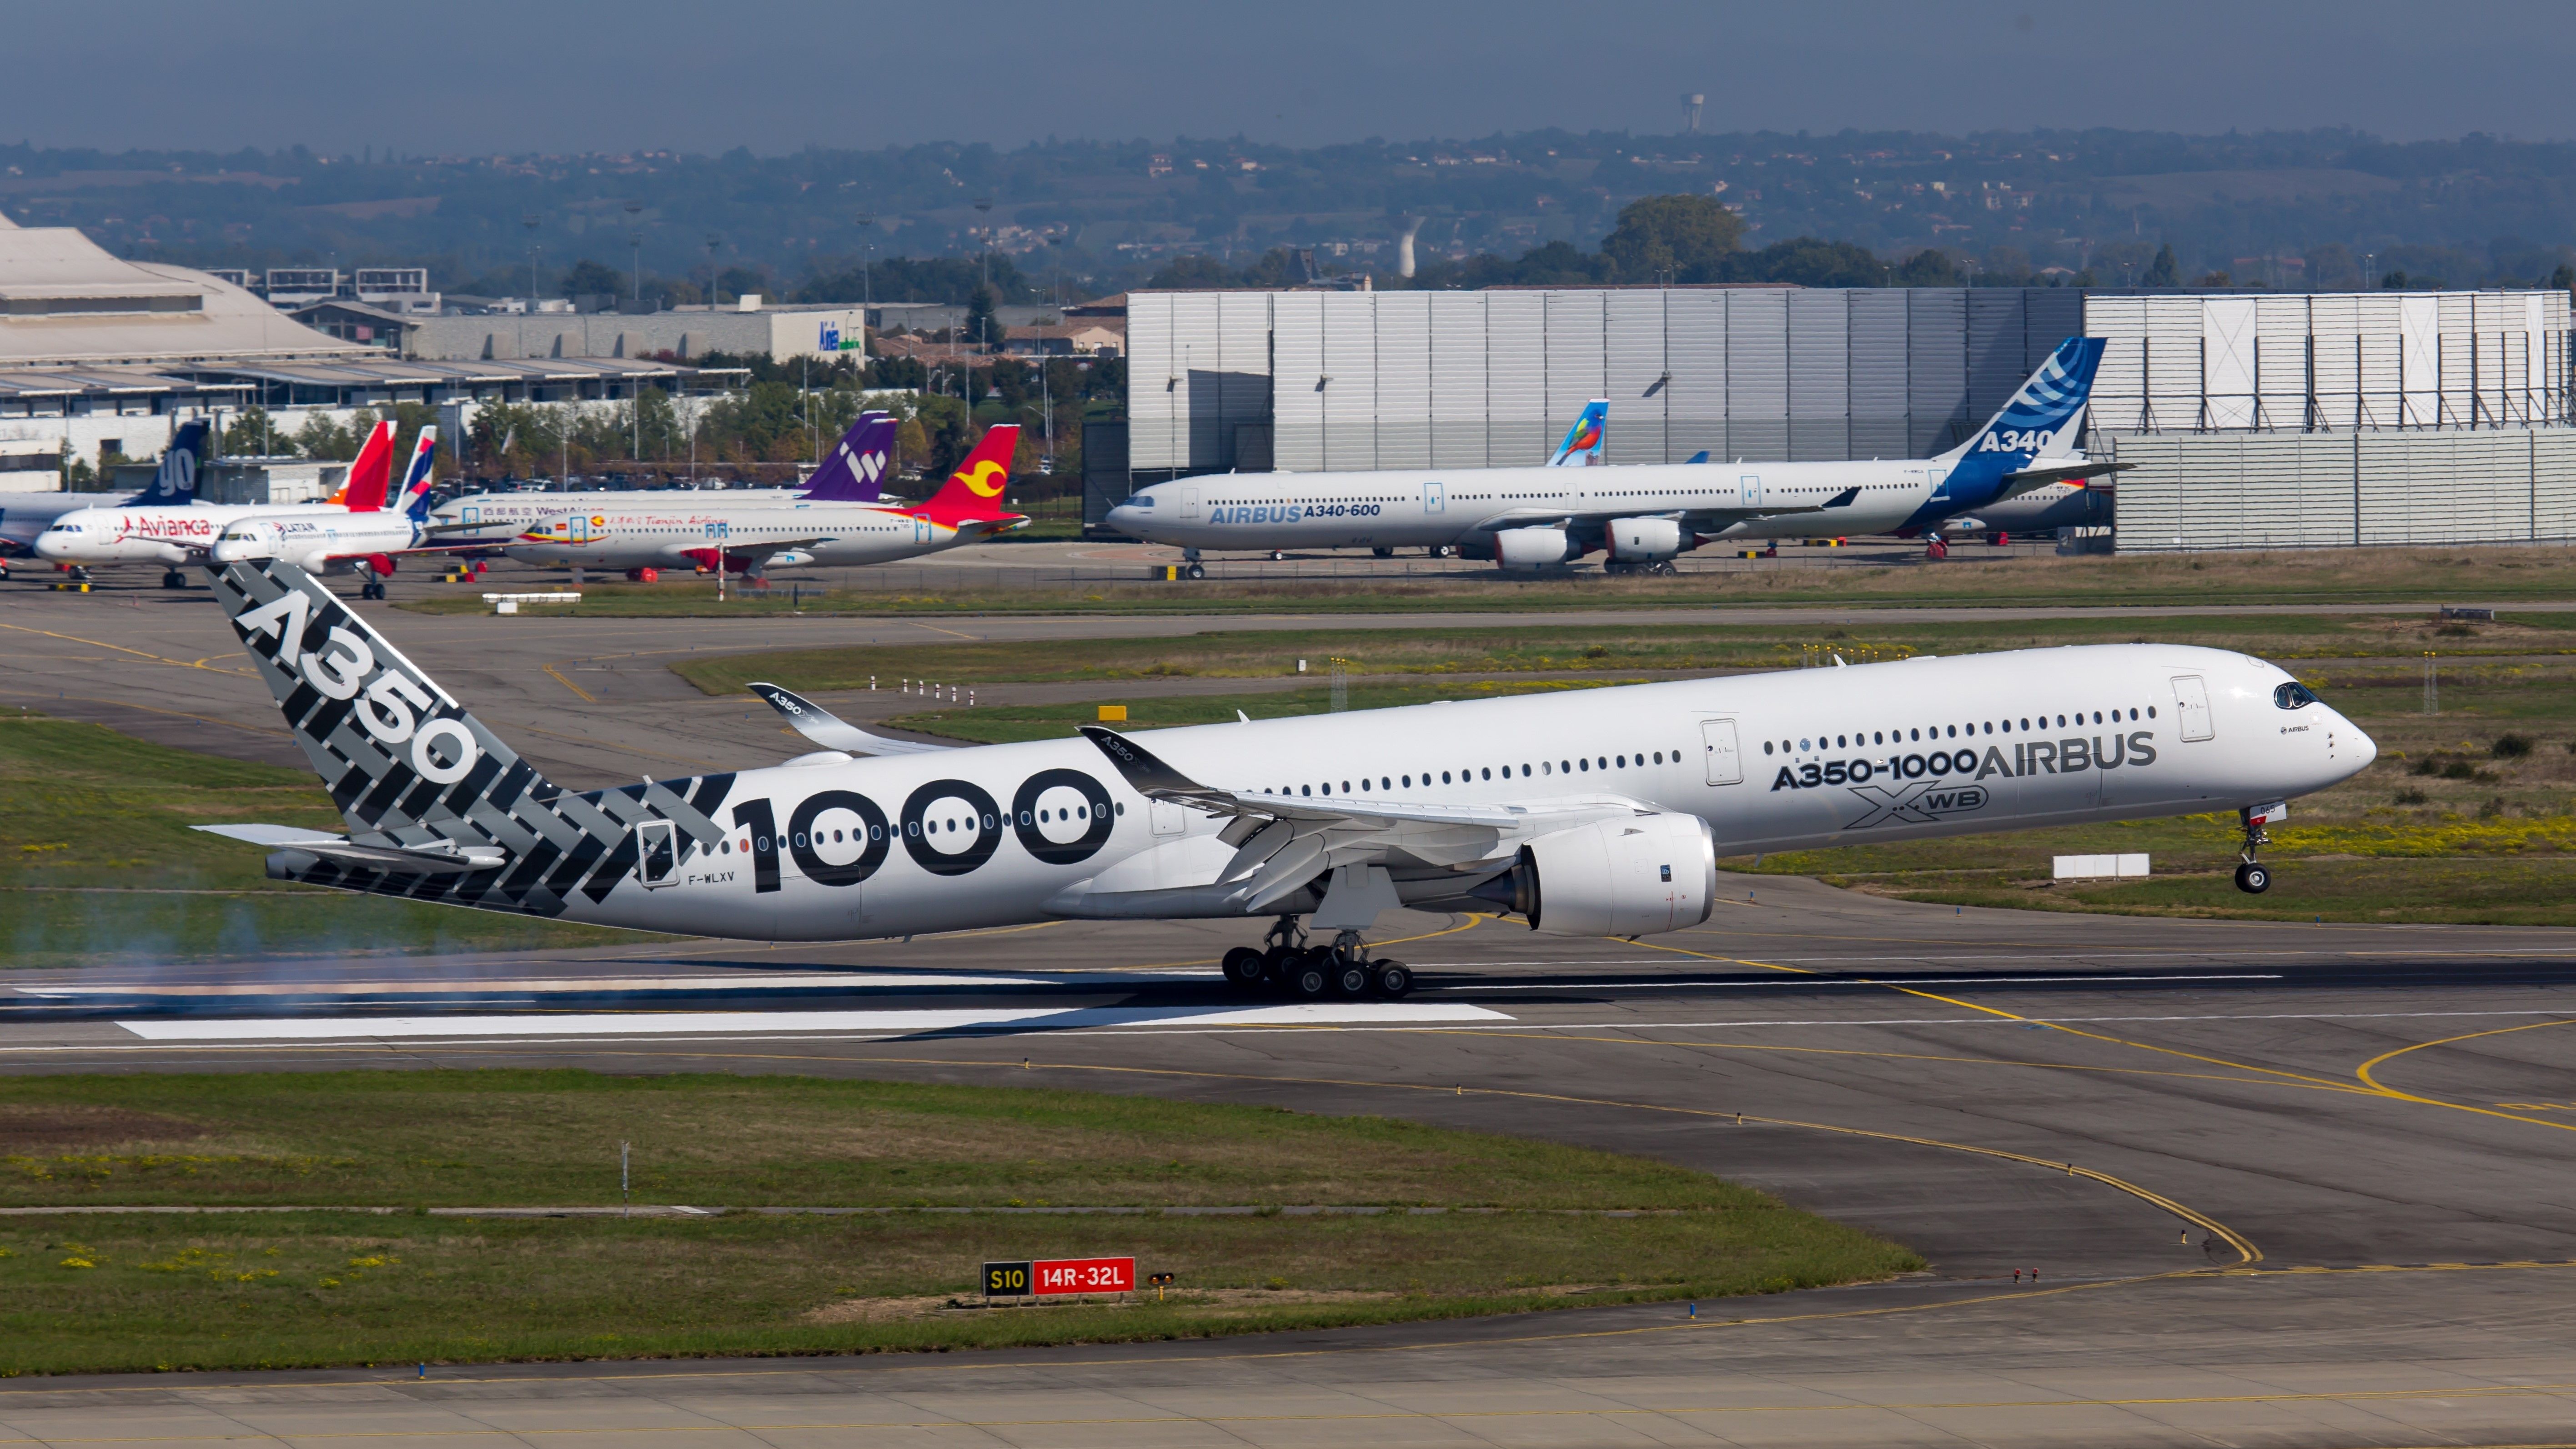 An Airbus A350-1000 Landing In Toulouse.